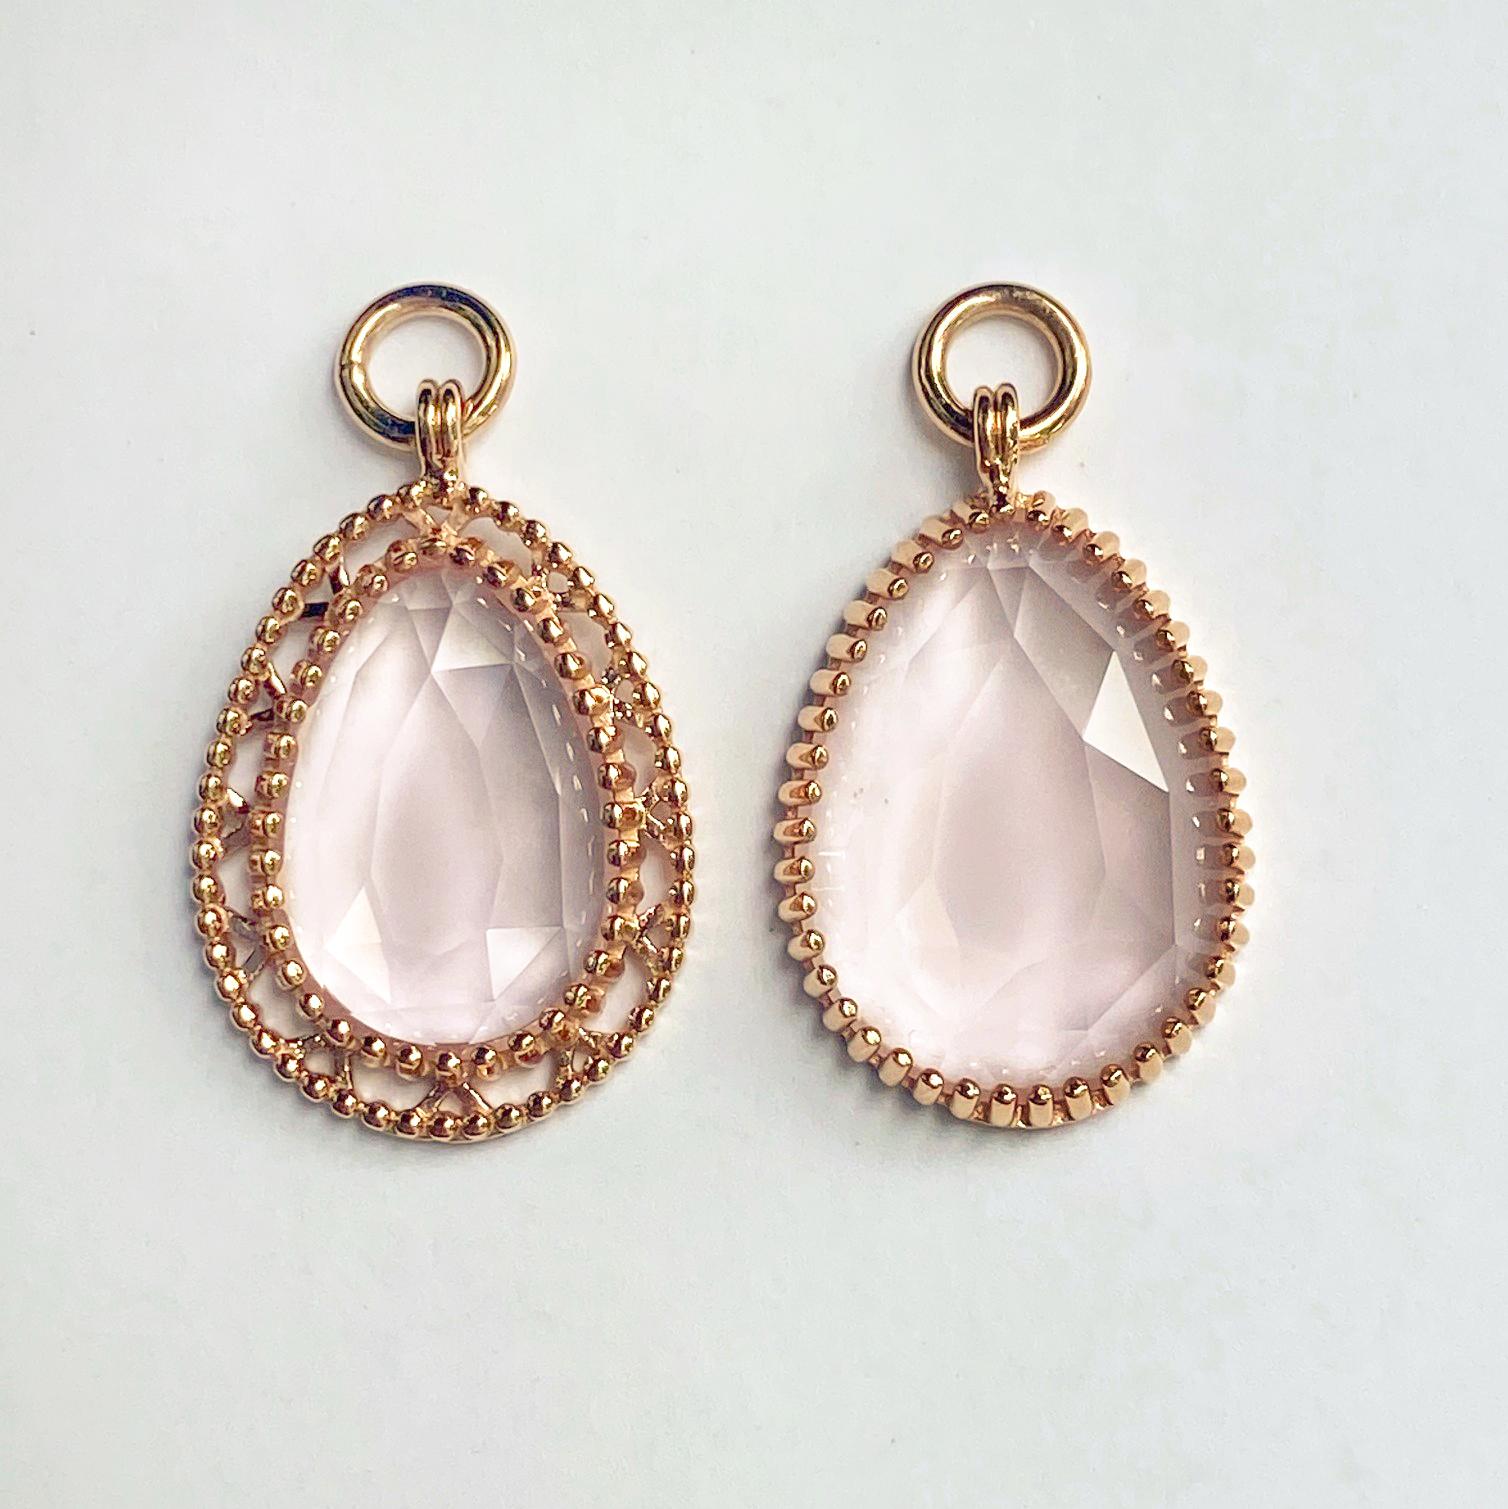 A pair of reversible 18k rose and white gold scroll style huggie hoops, with a pair of asymmetrical 18k rose gold jackets set with 9.86 carat lens cut rose quartz. These earrings were made and designed by llyn strong.
Items can be sold separately